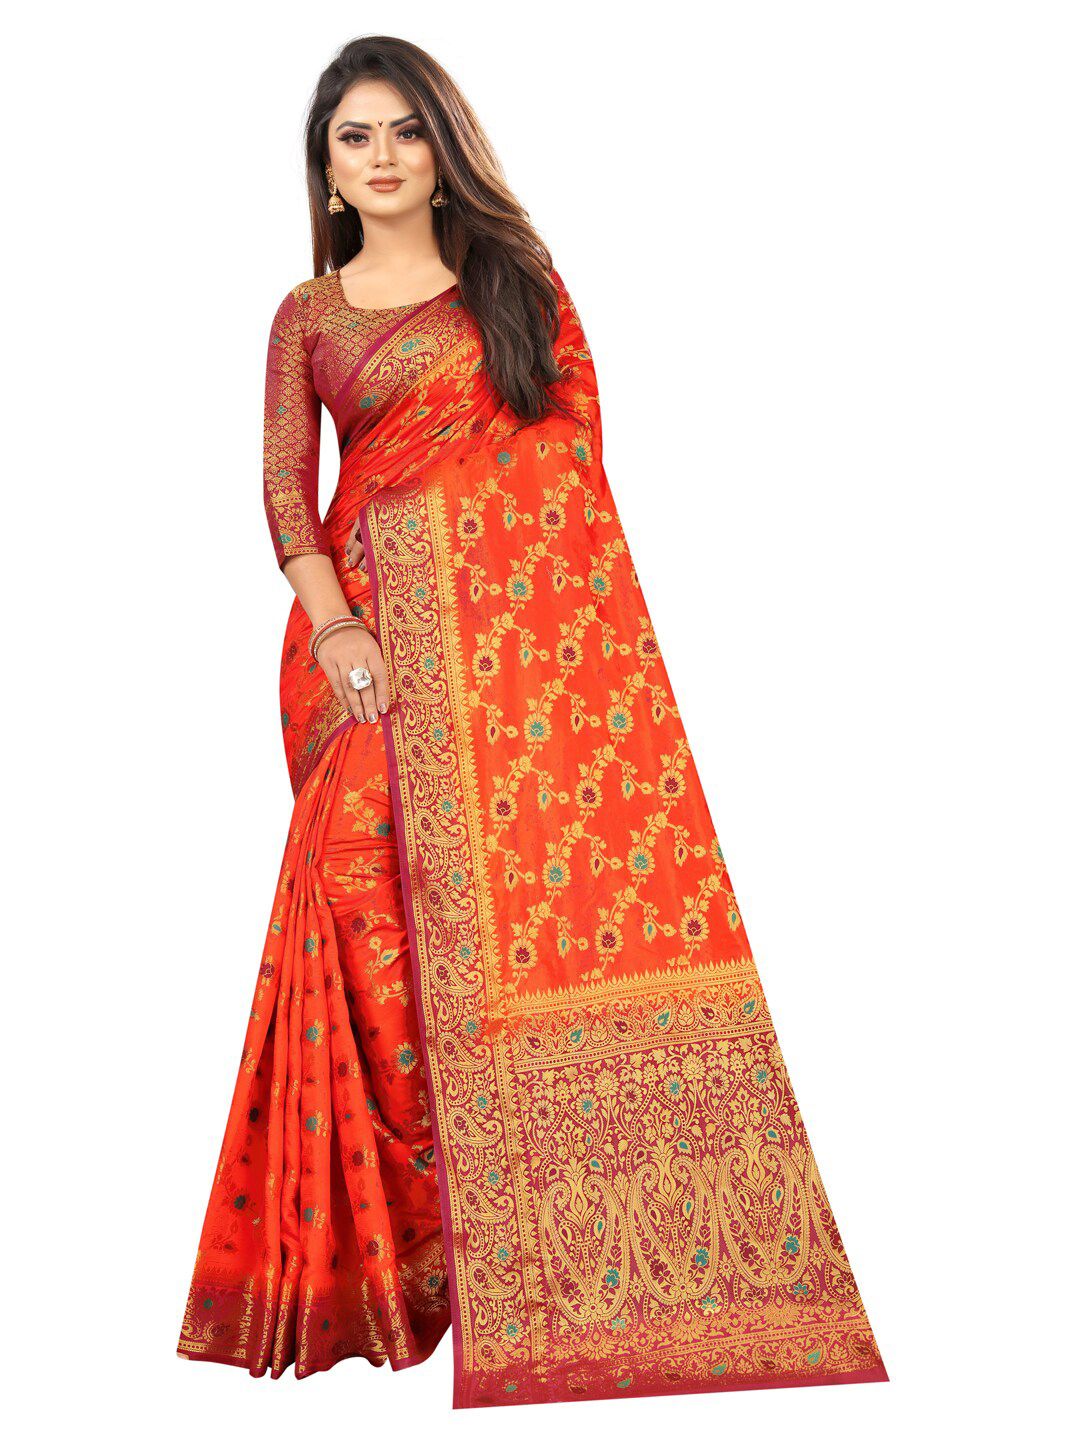 PERFECT WEAR Rust & Maroon Floral Silk Cotton Saree Price in India